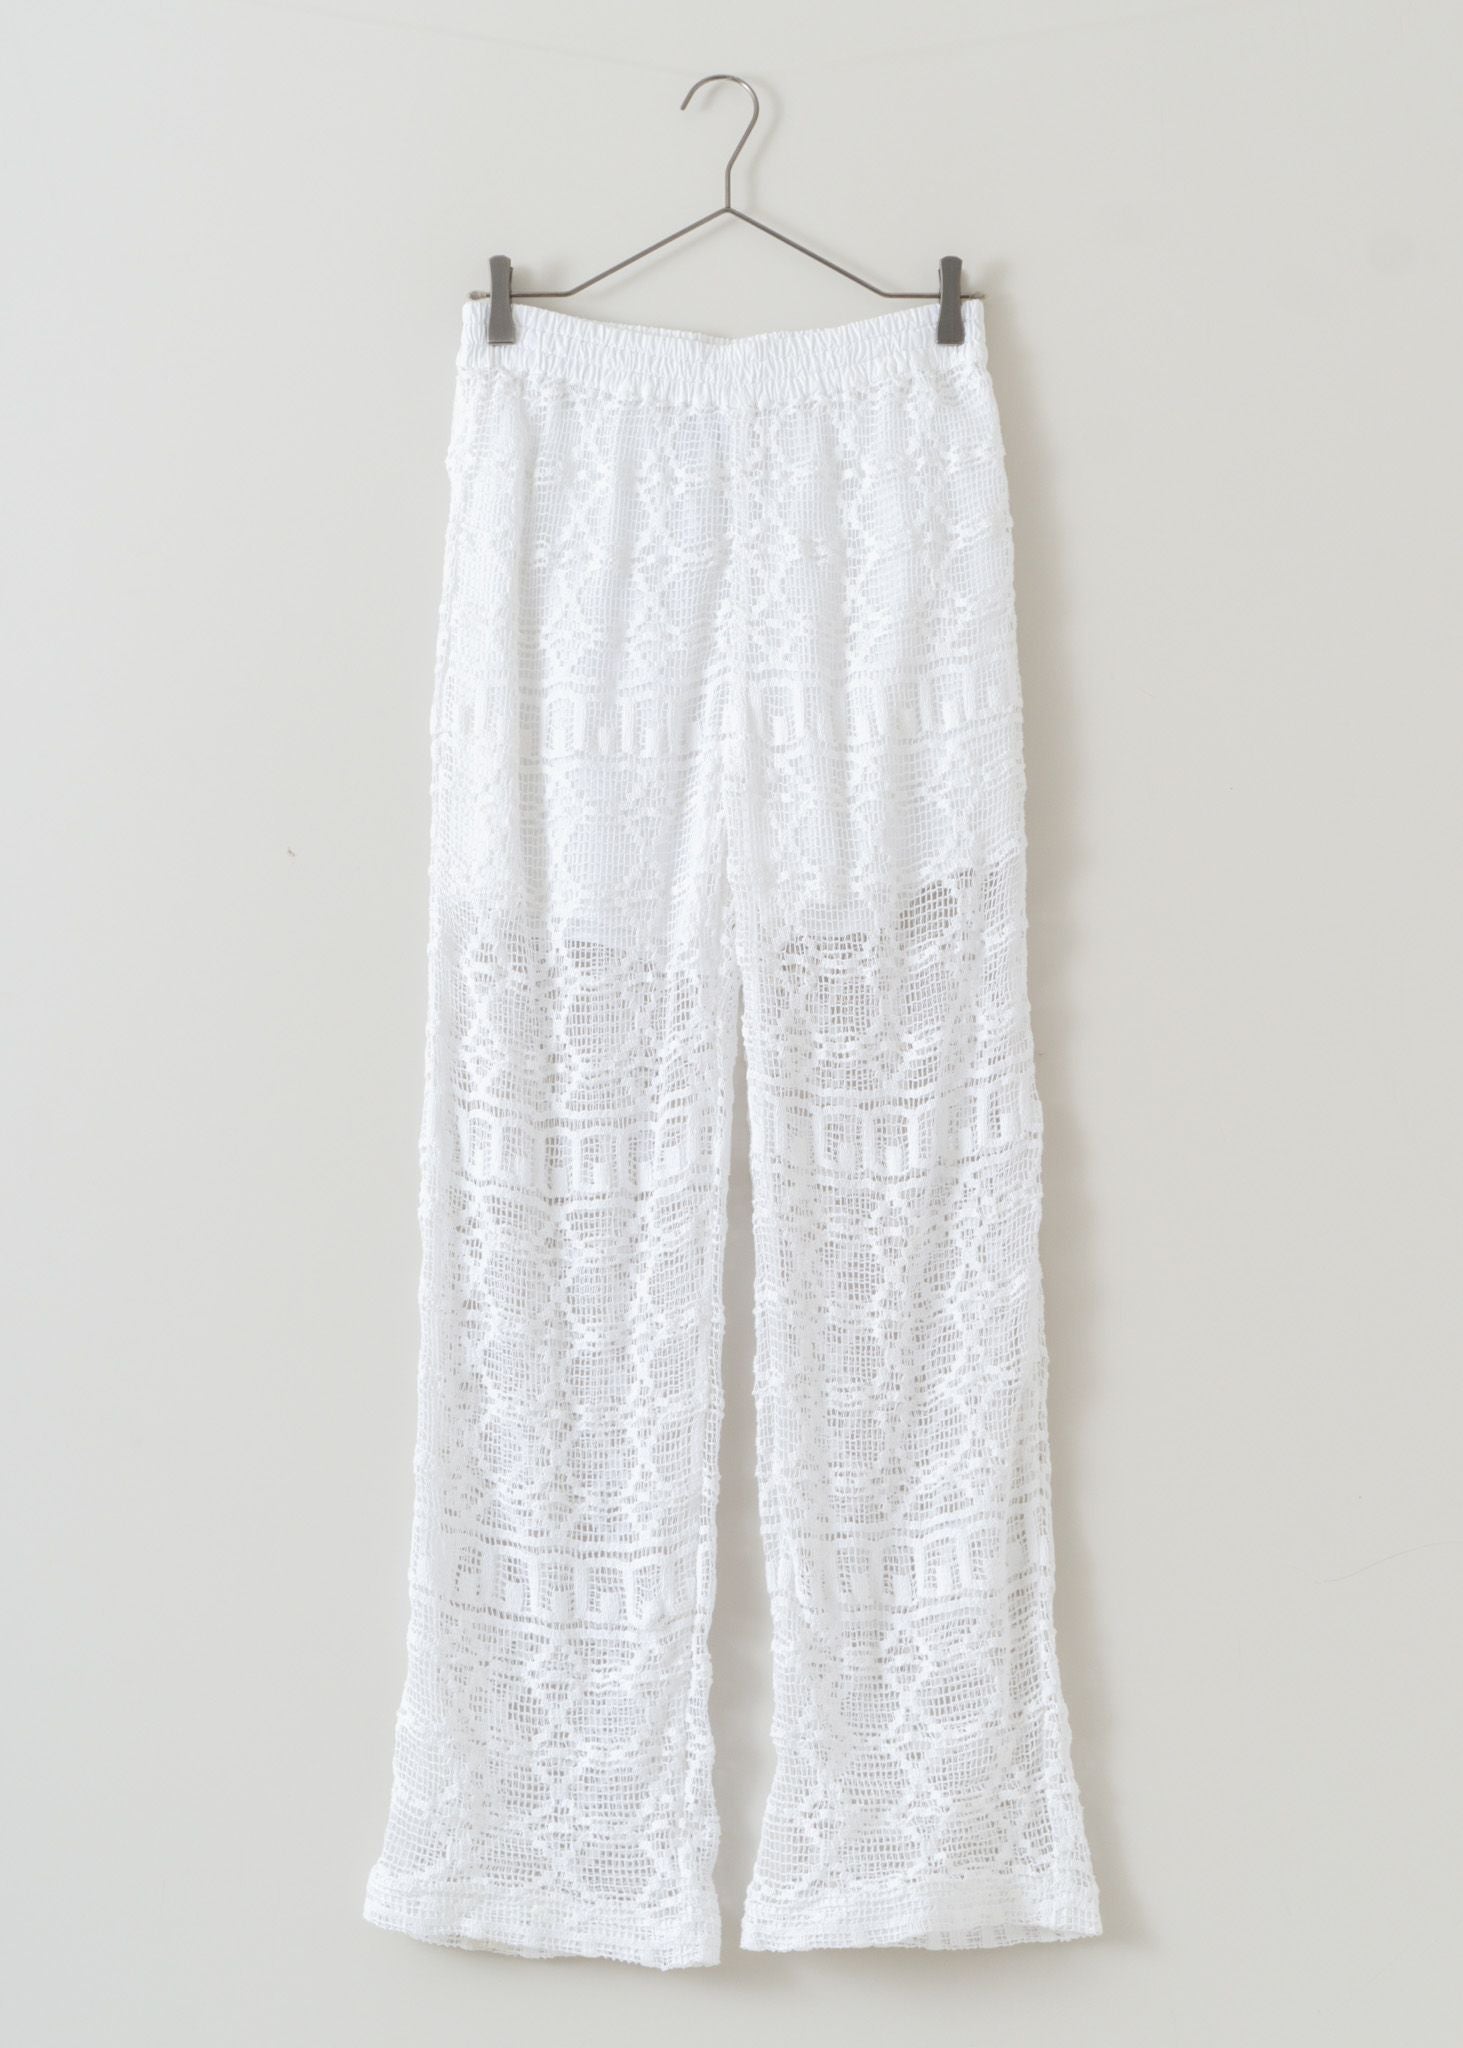 Geometric Lace Relax Pants | Pasand by ne Quittez pas | パサン 